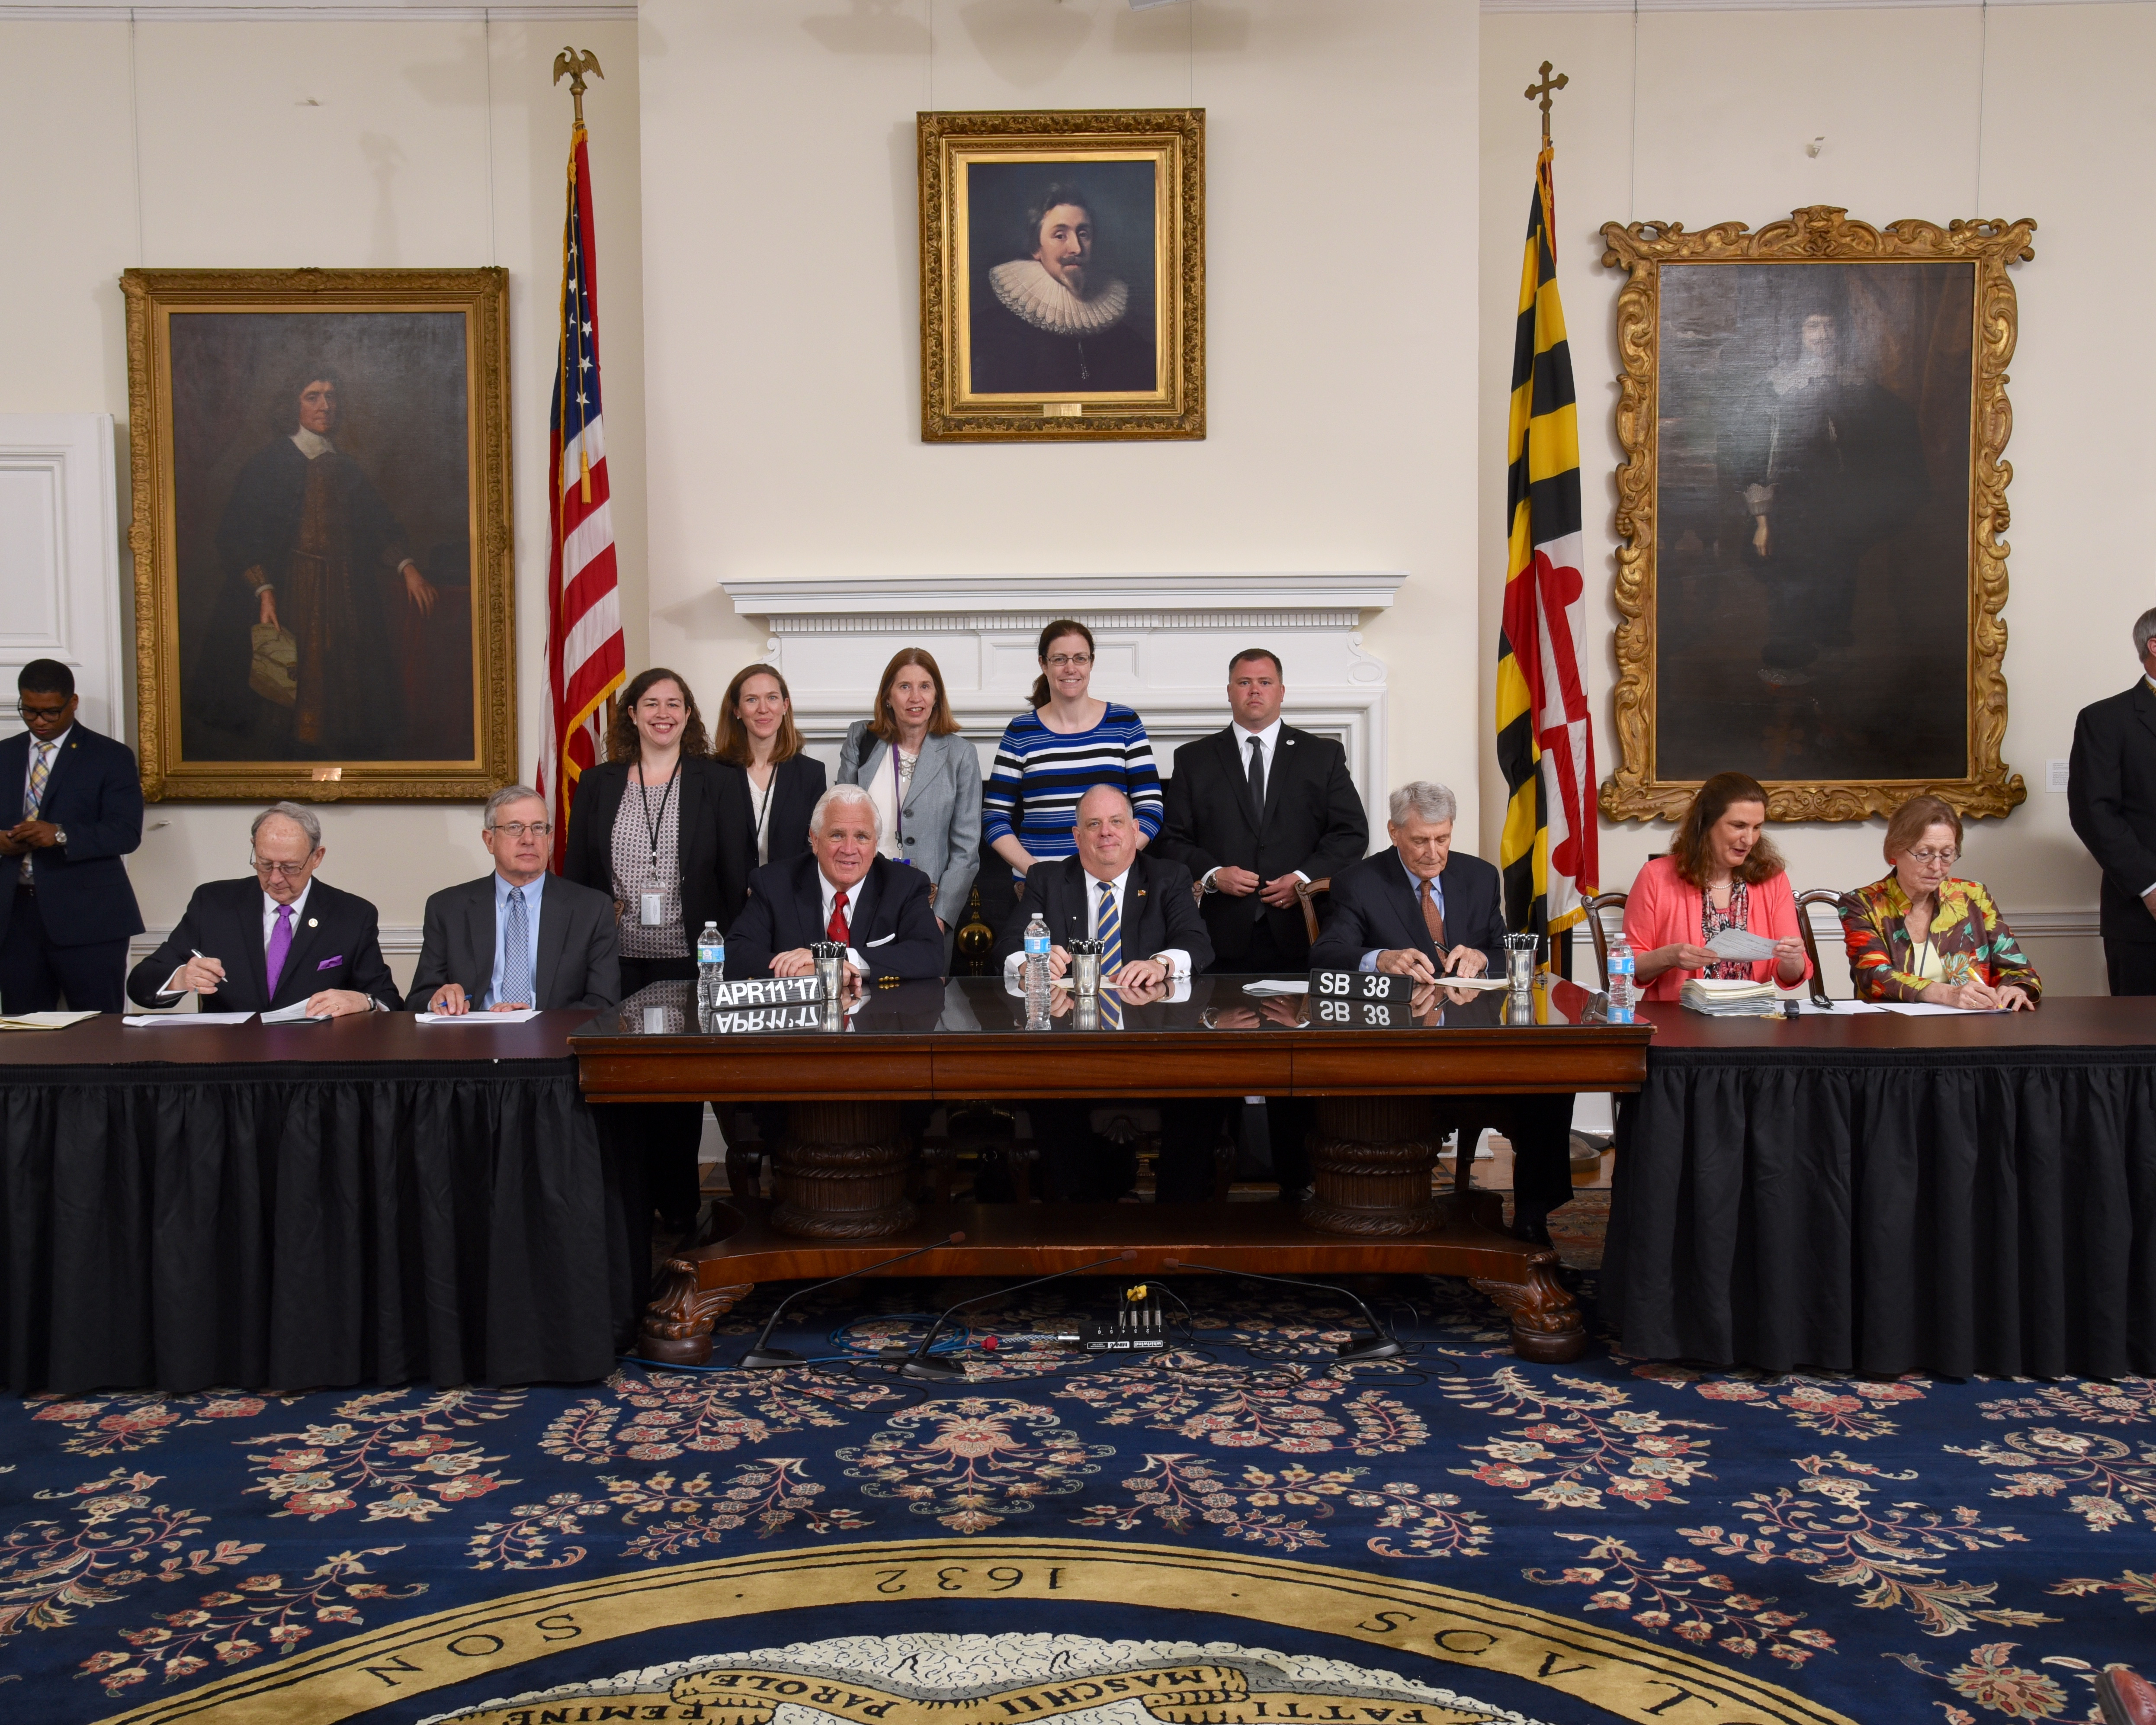 Picture of Governor Hogan signing SB-28 with staff behind him